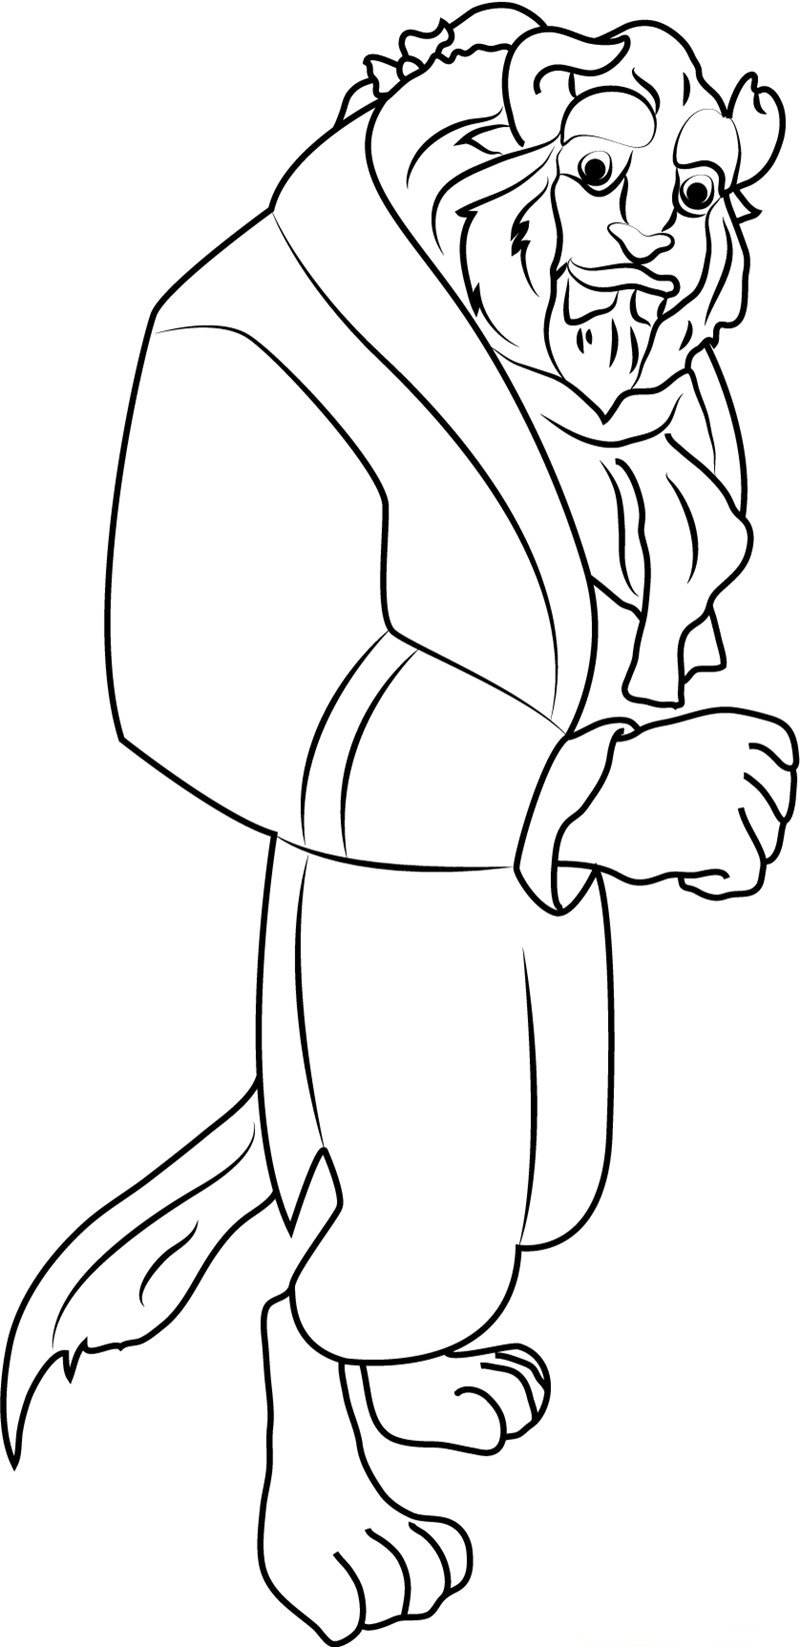 The Beast Gentlement Coloring Pages